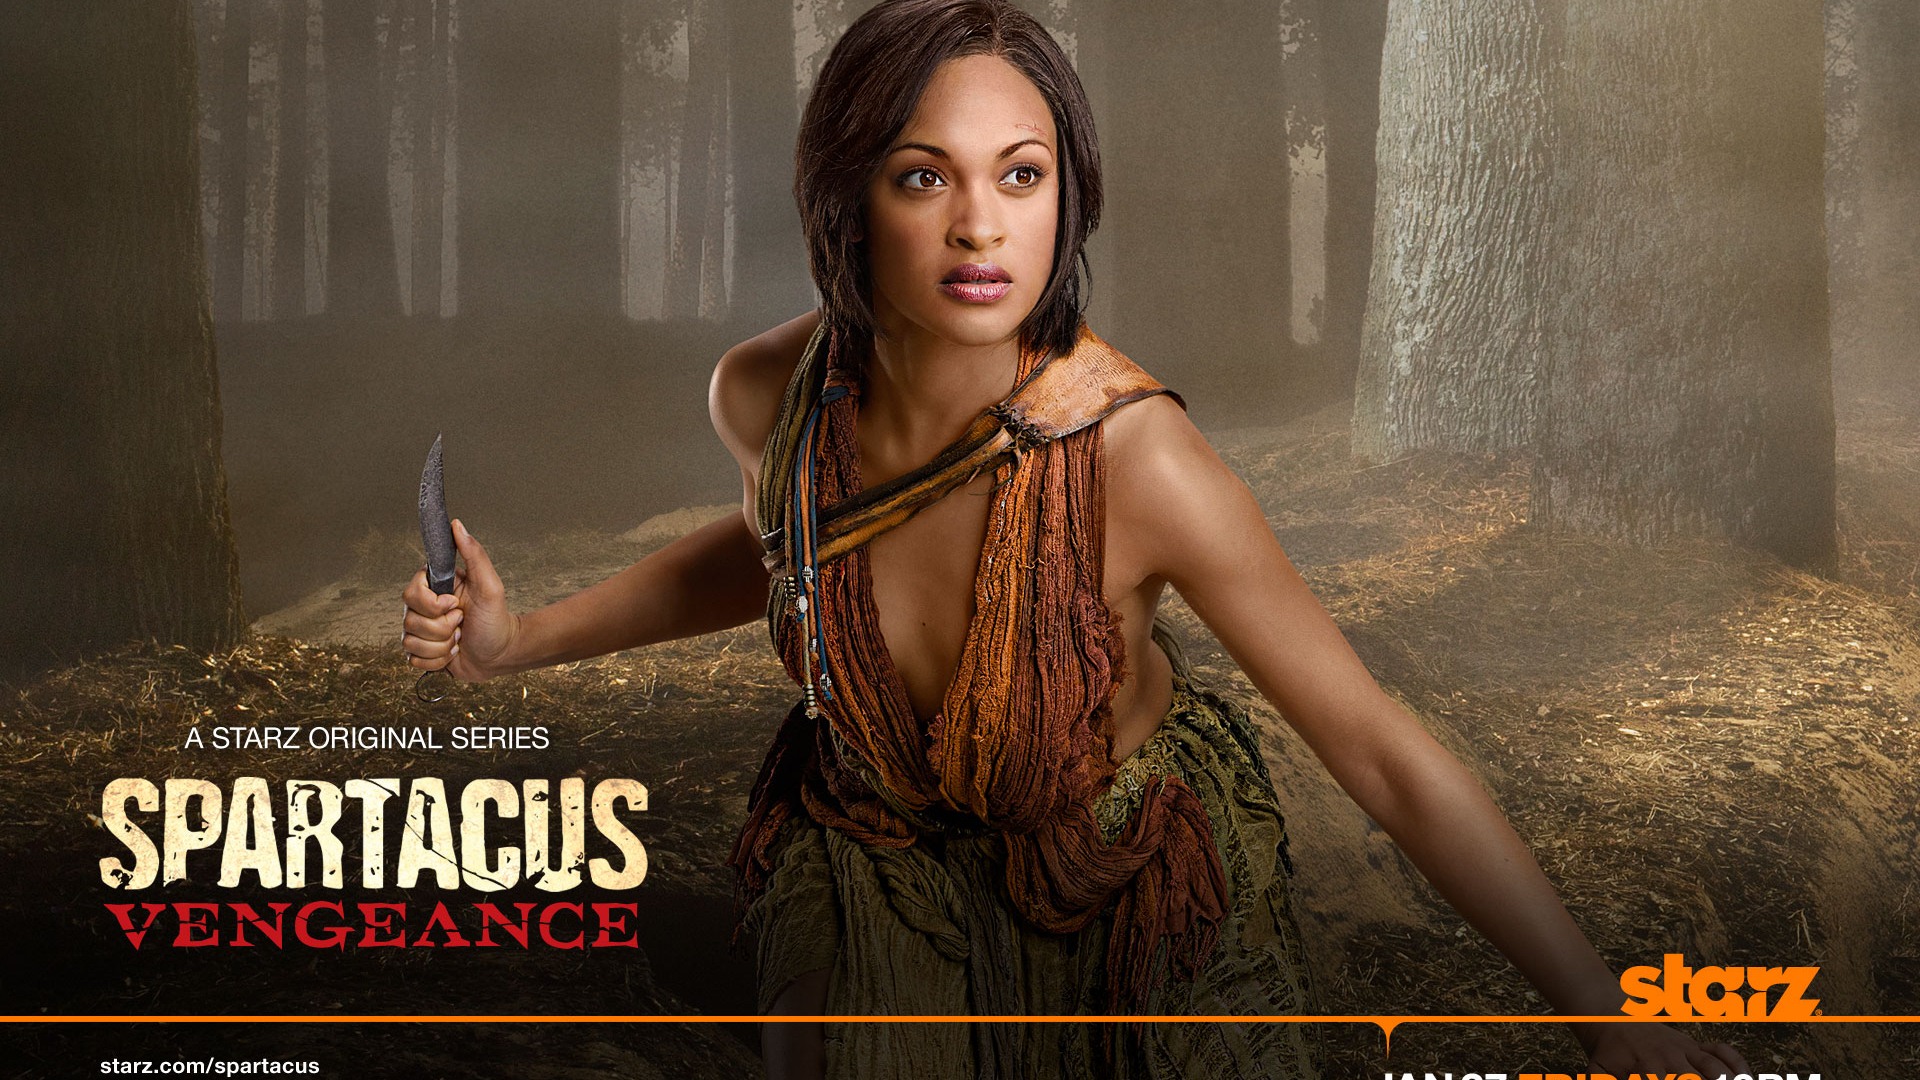 Spartacus: Vengeance HD wallpapers #5 - 1920x1080